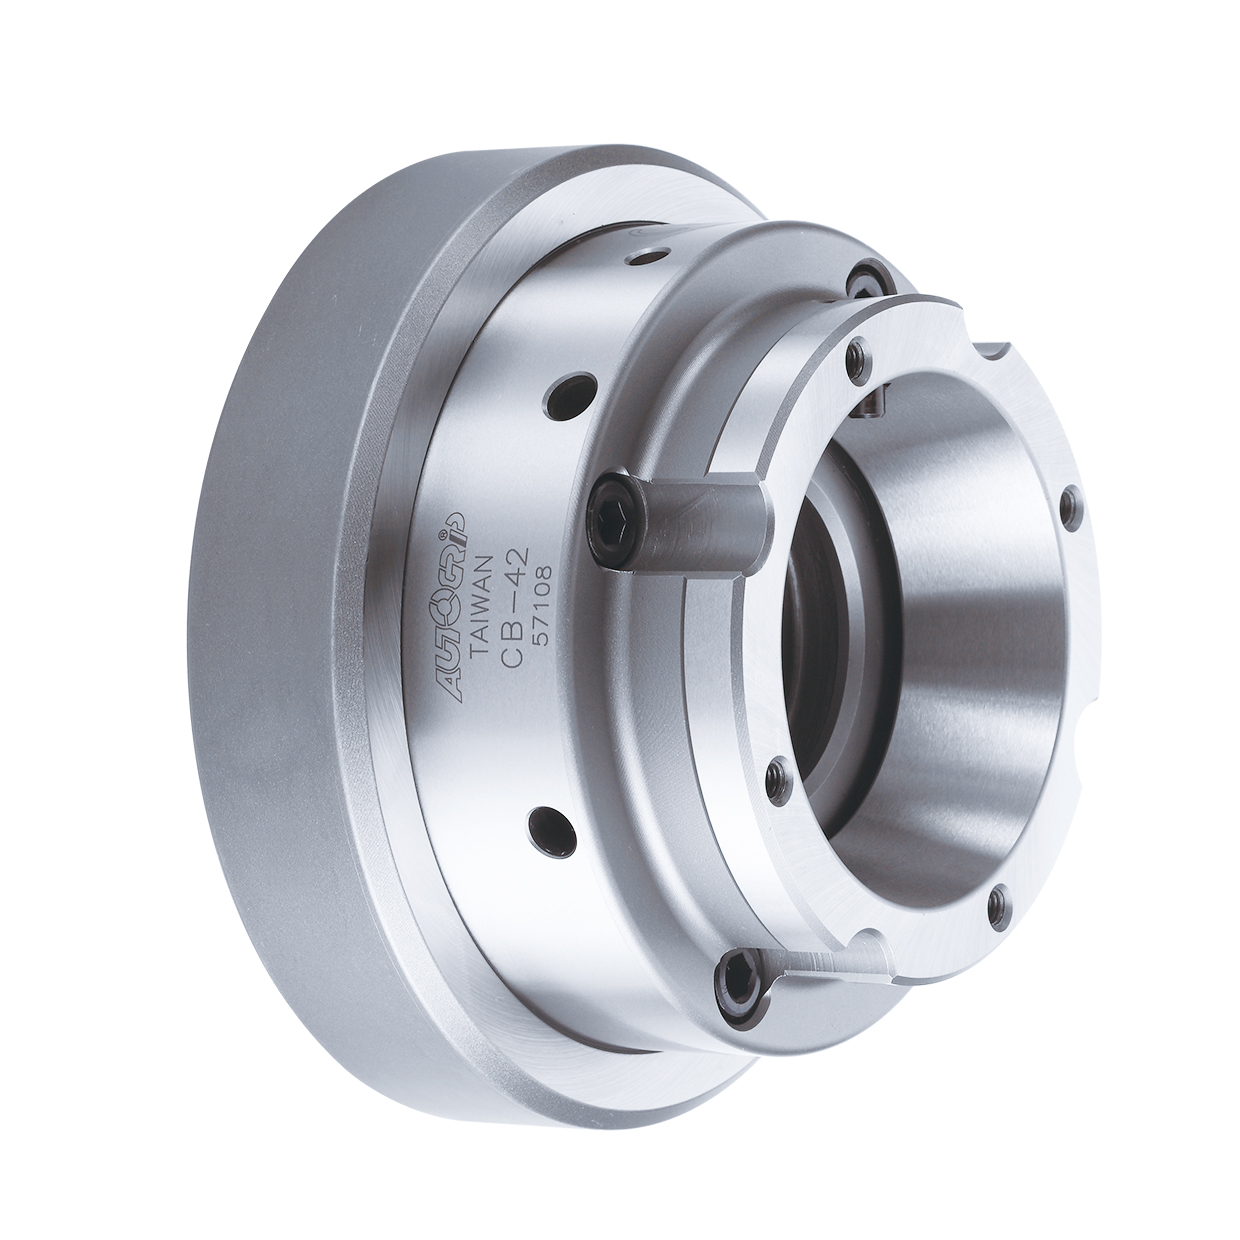 Products|Collet Chuck